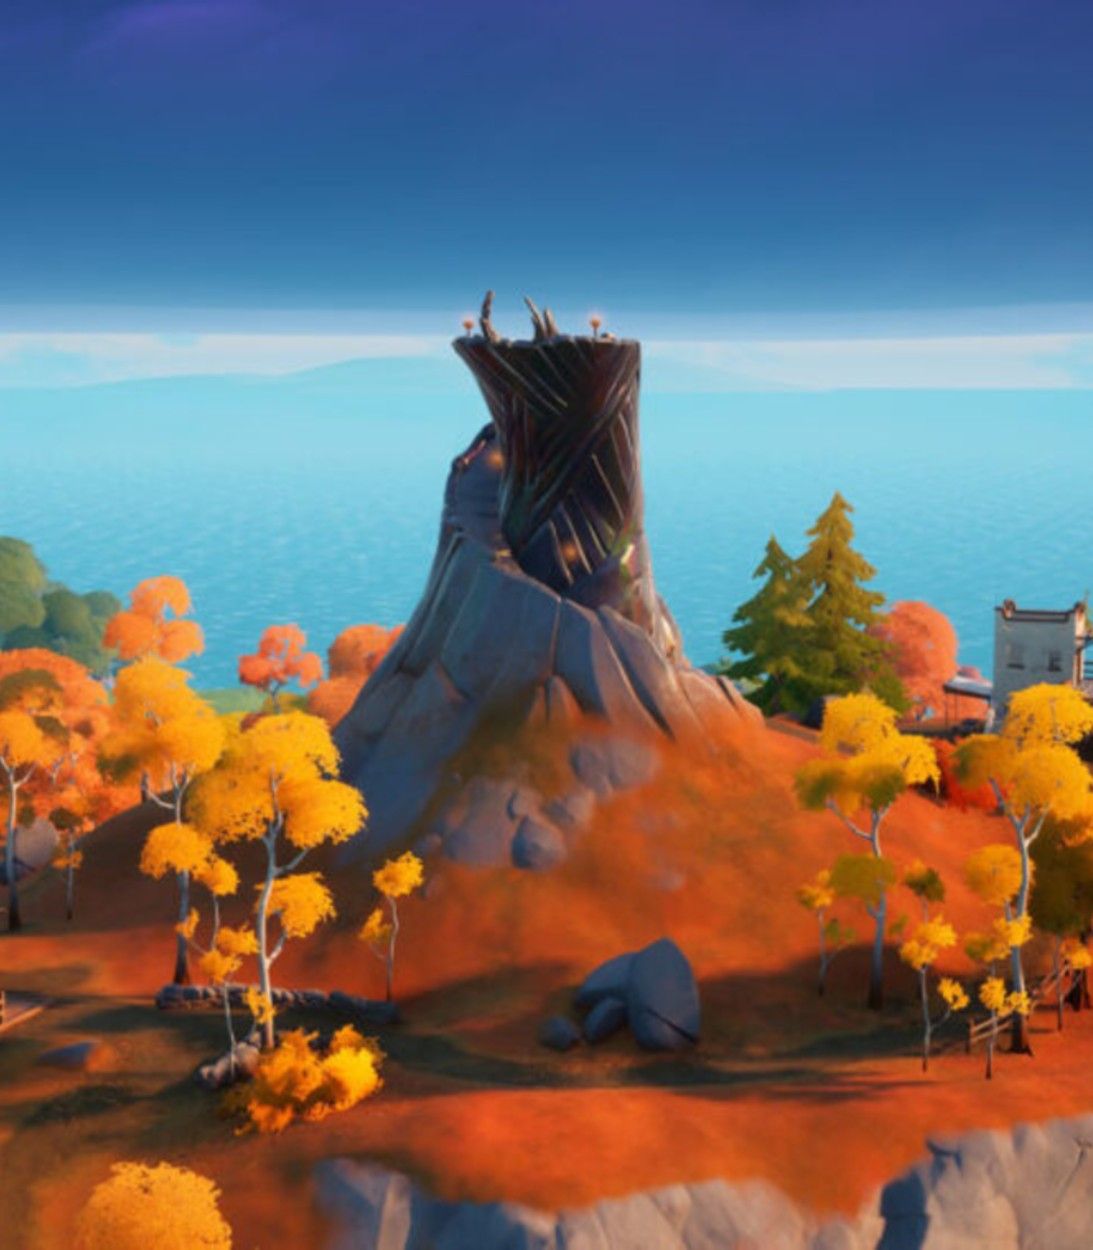 A smaller spire on the outskirts of the Fortnite map in Season 6